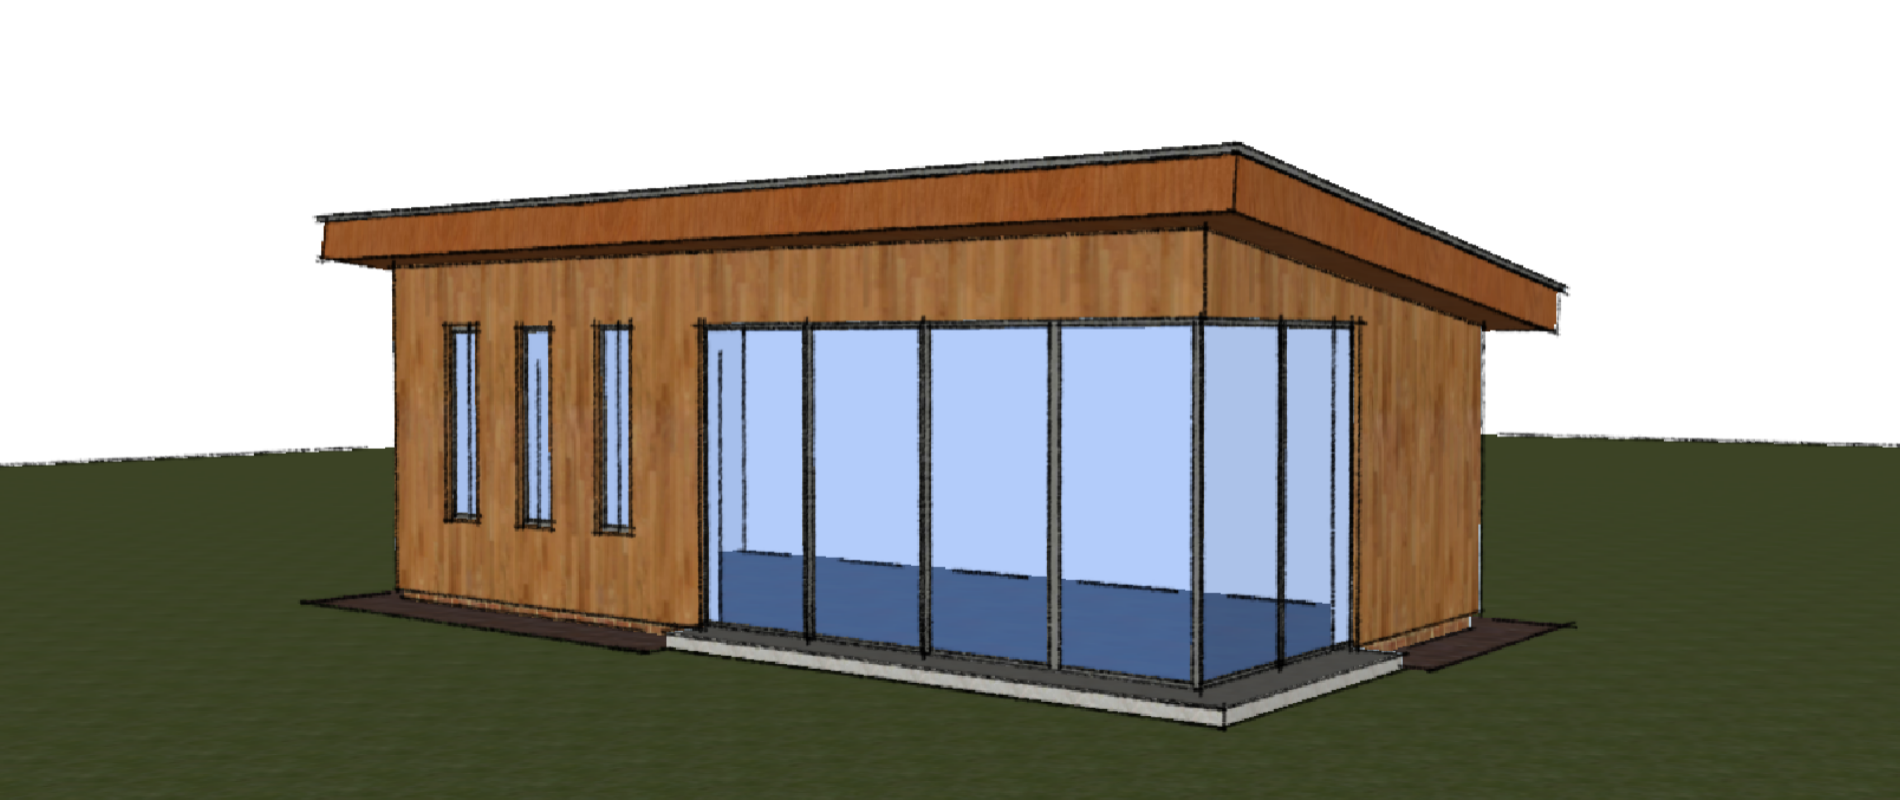 Can I Build A Wooden Shed Without Planning Permission 